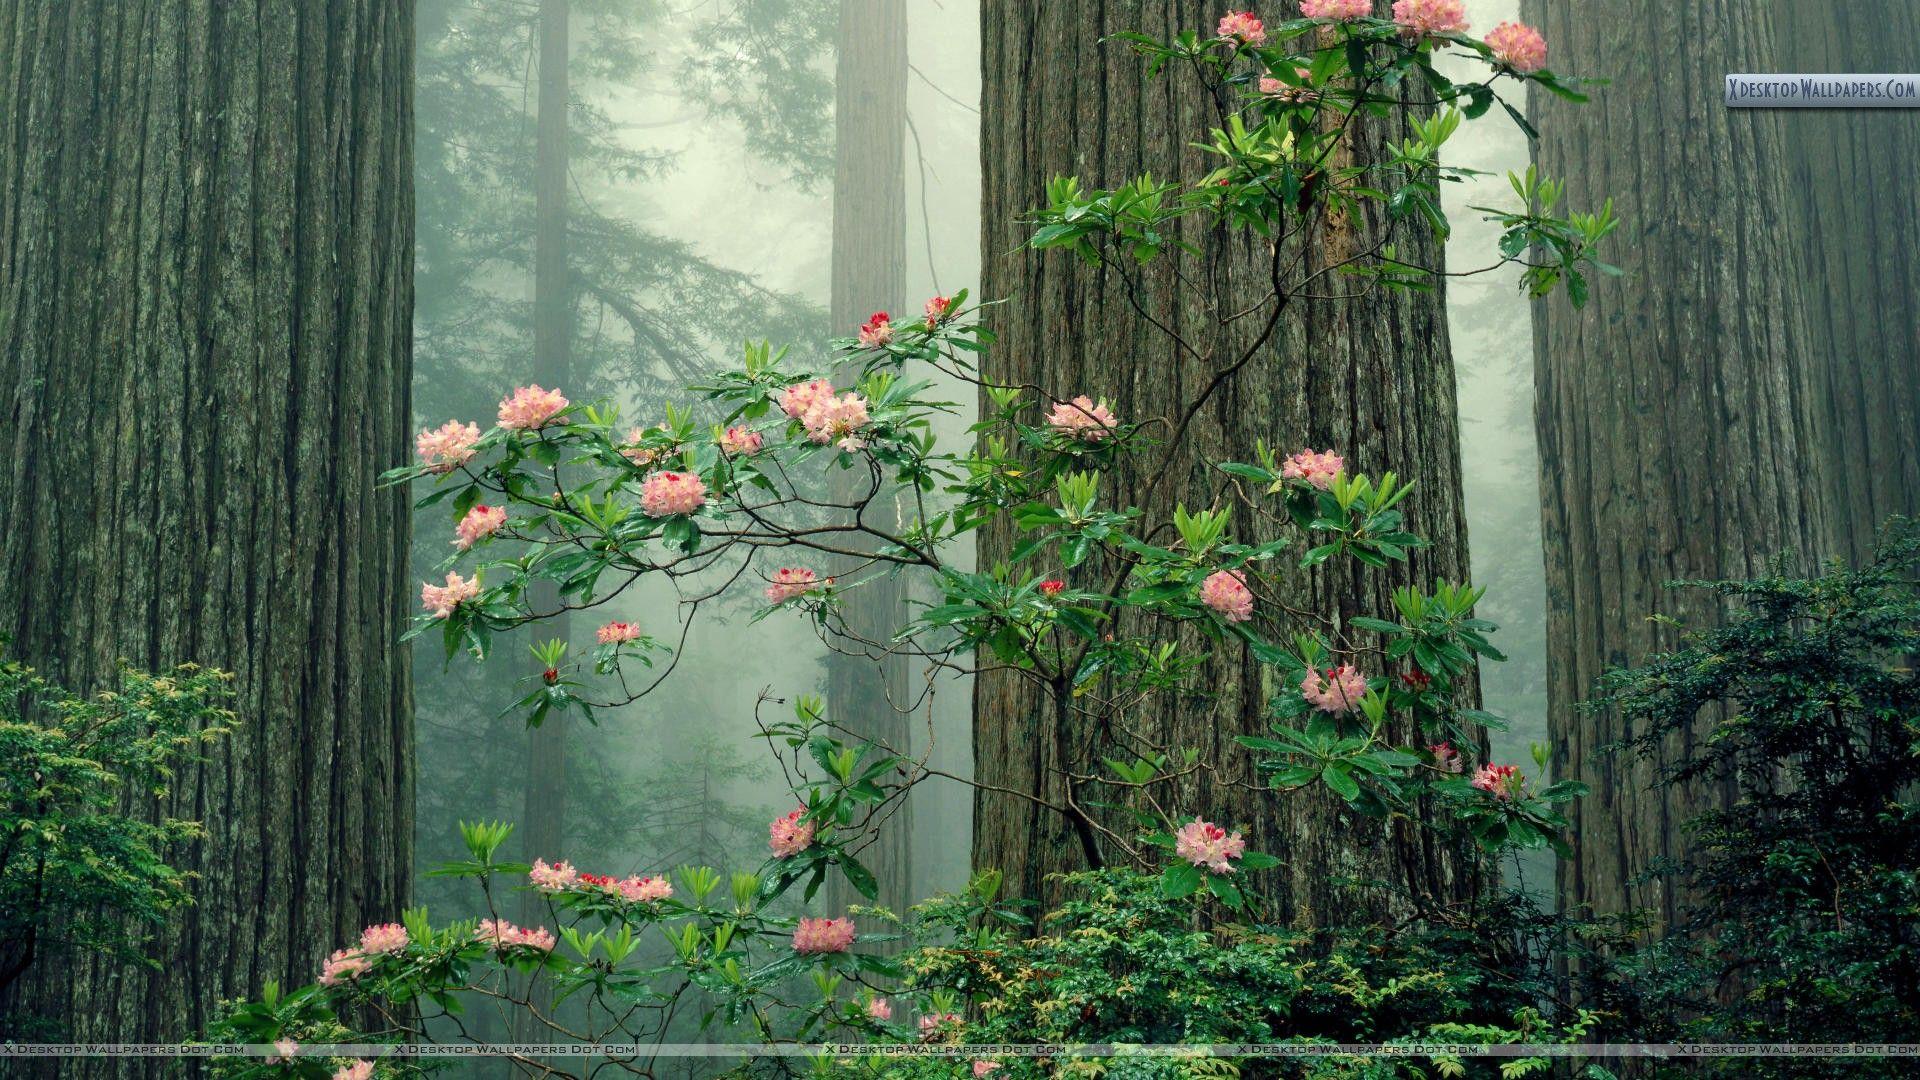 Rhododendrons in Bloom, Redwood National Park, California Wallpaper